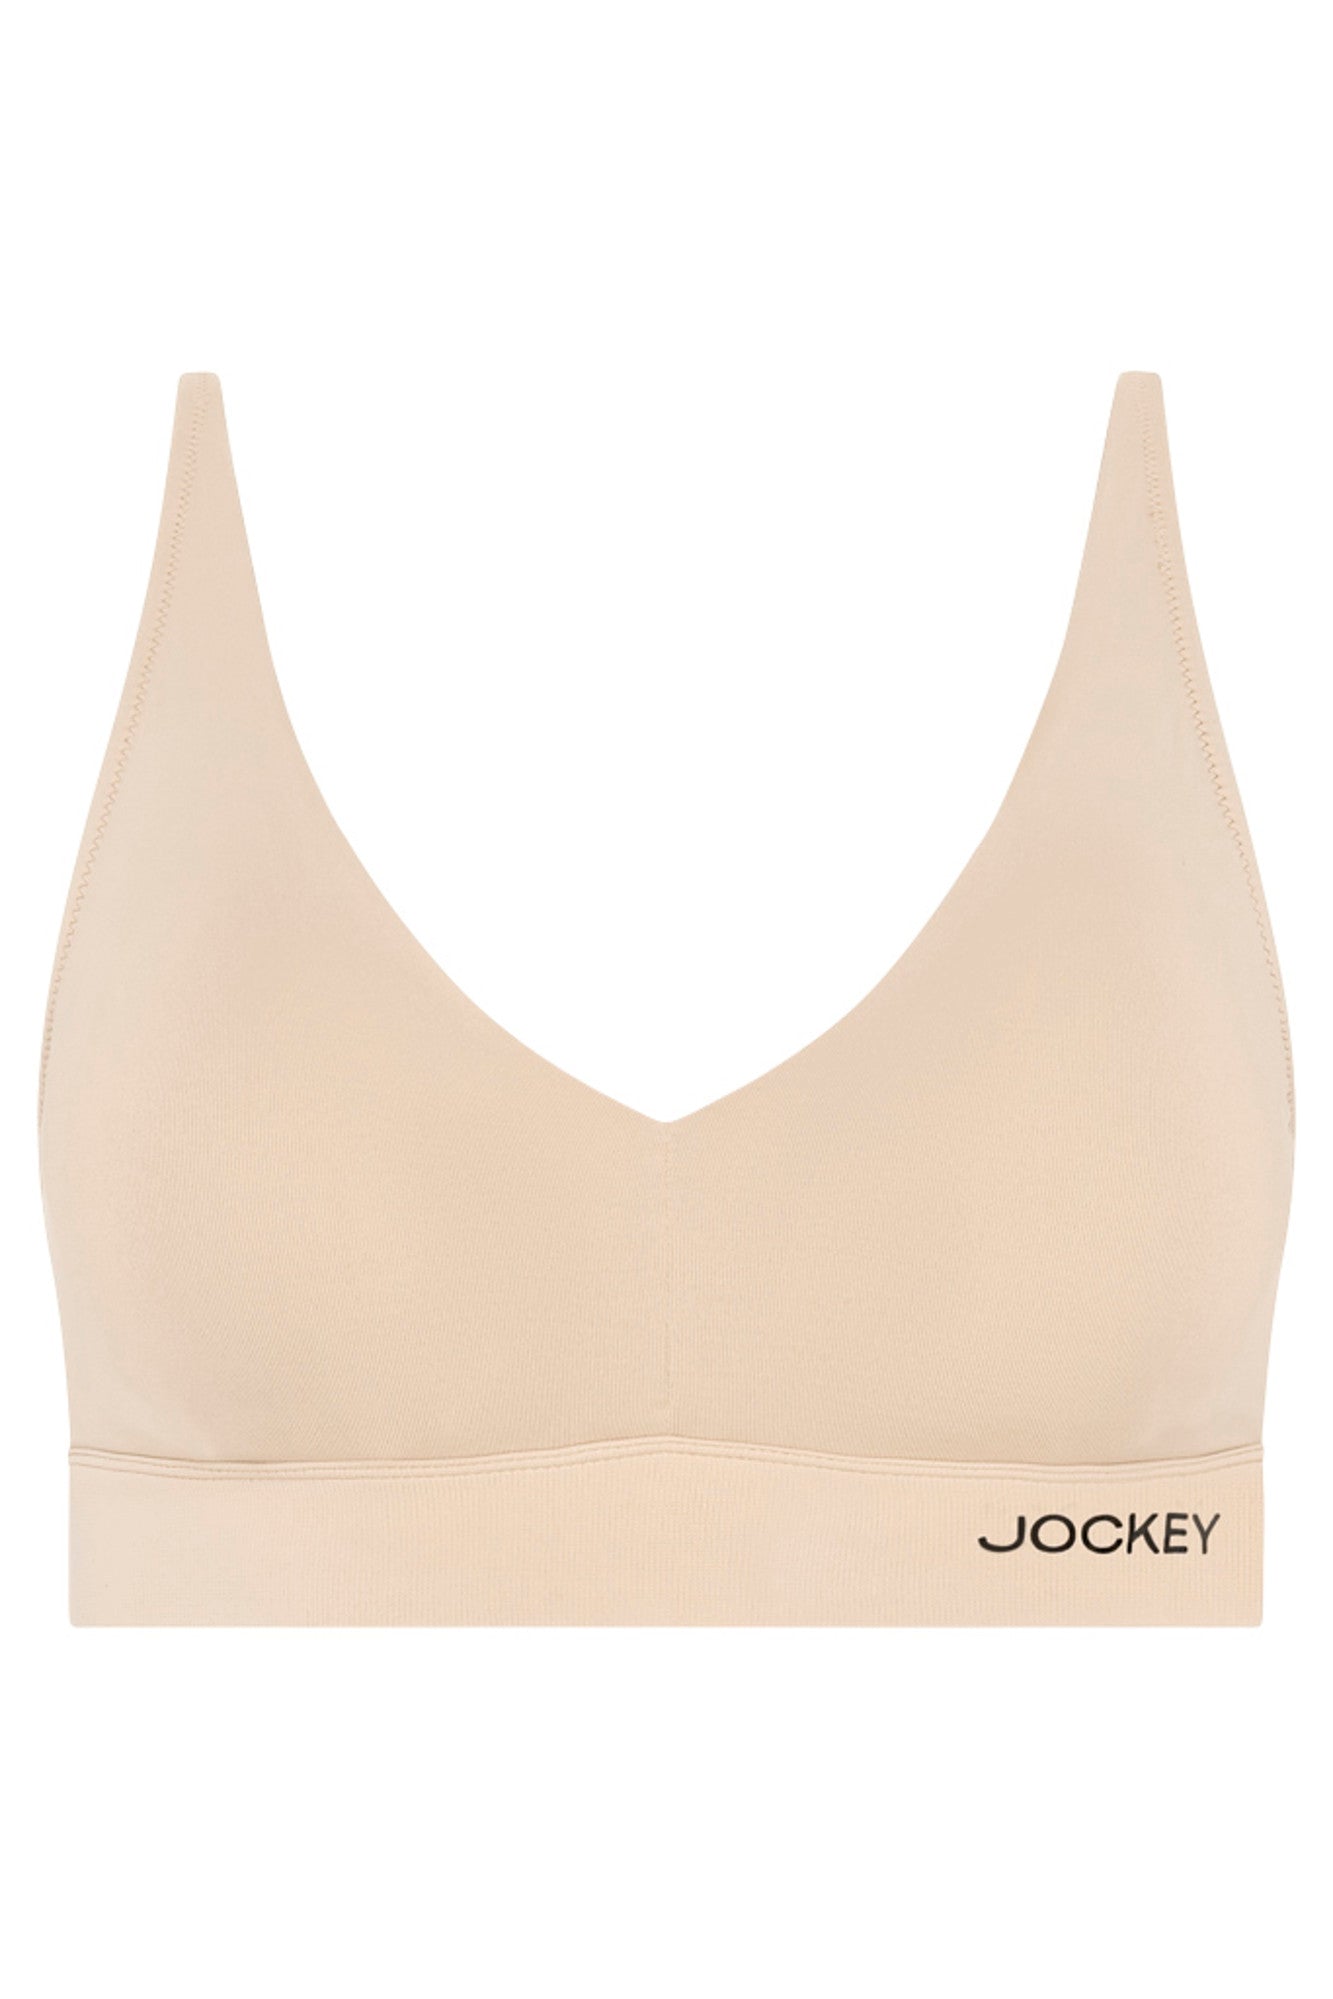 JOCKEY Size 5/32 Classic Soft Cup Coverage WireFree Bra Style:6704 Nude  Beige